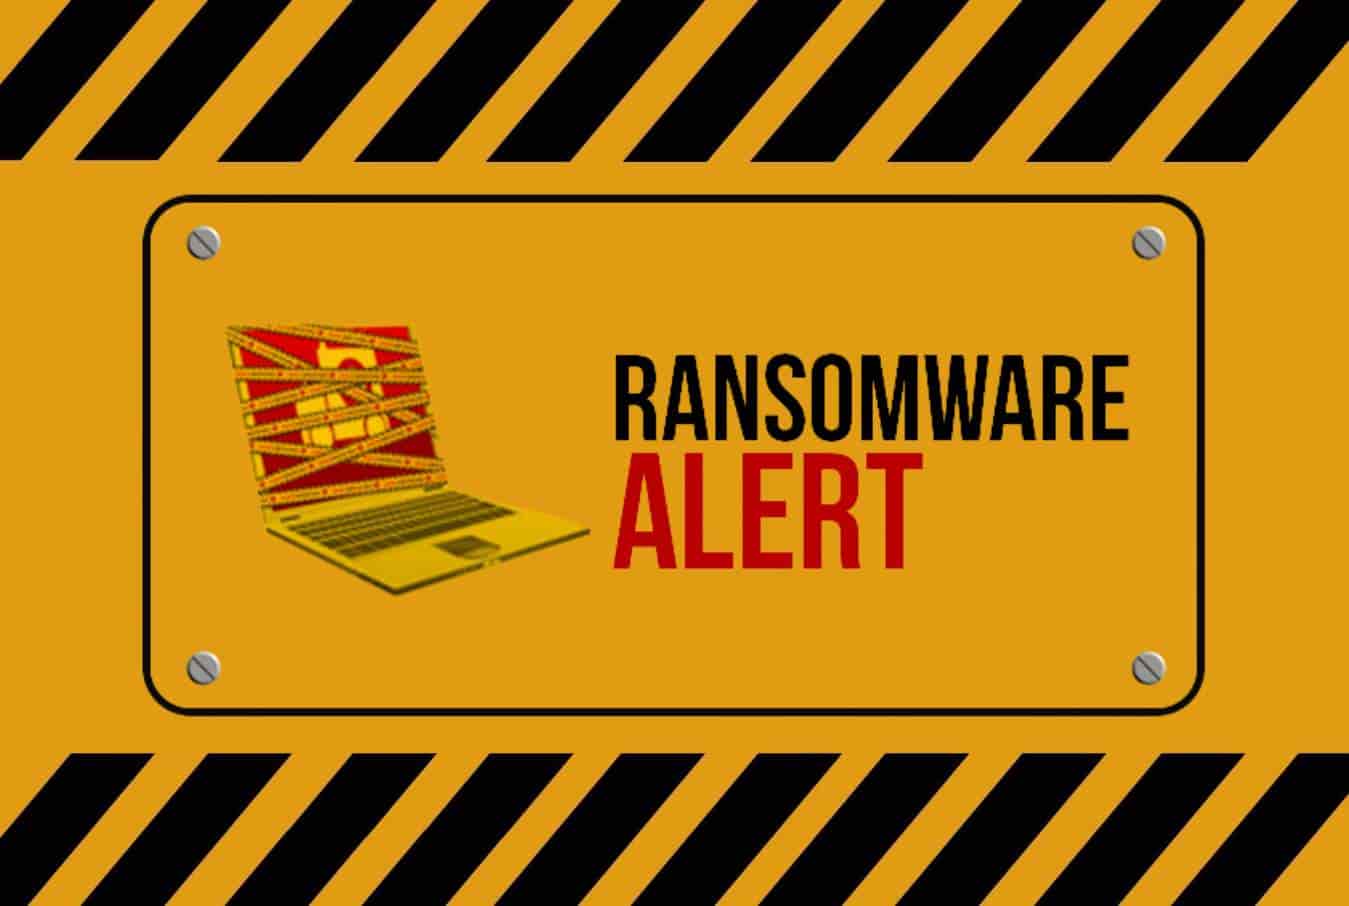 FBI warns of ransomware against Food and Agriculture sectors